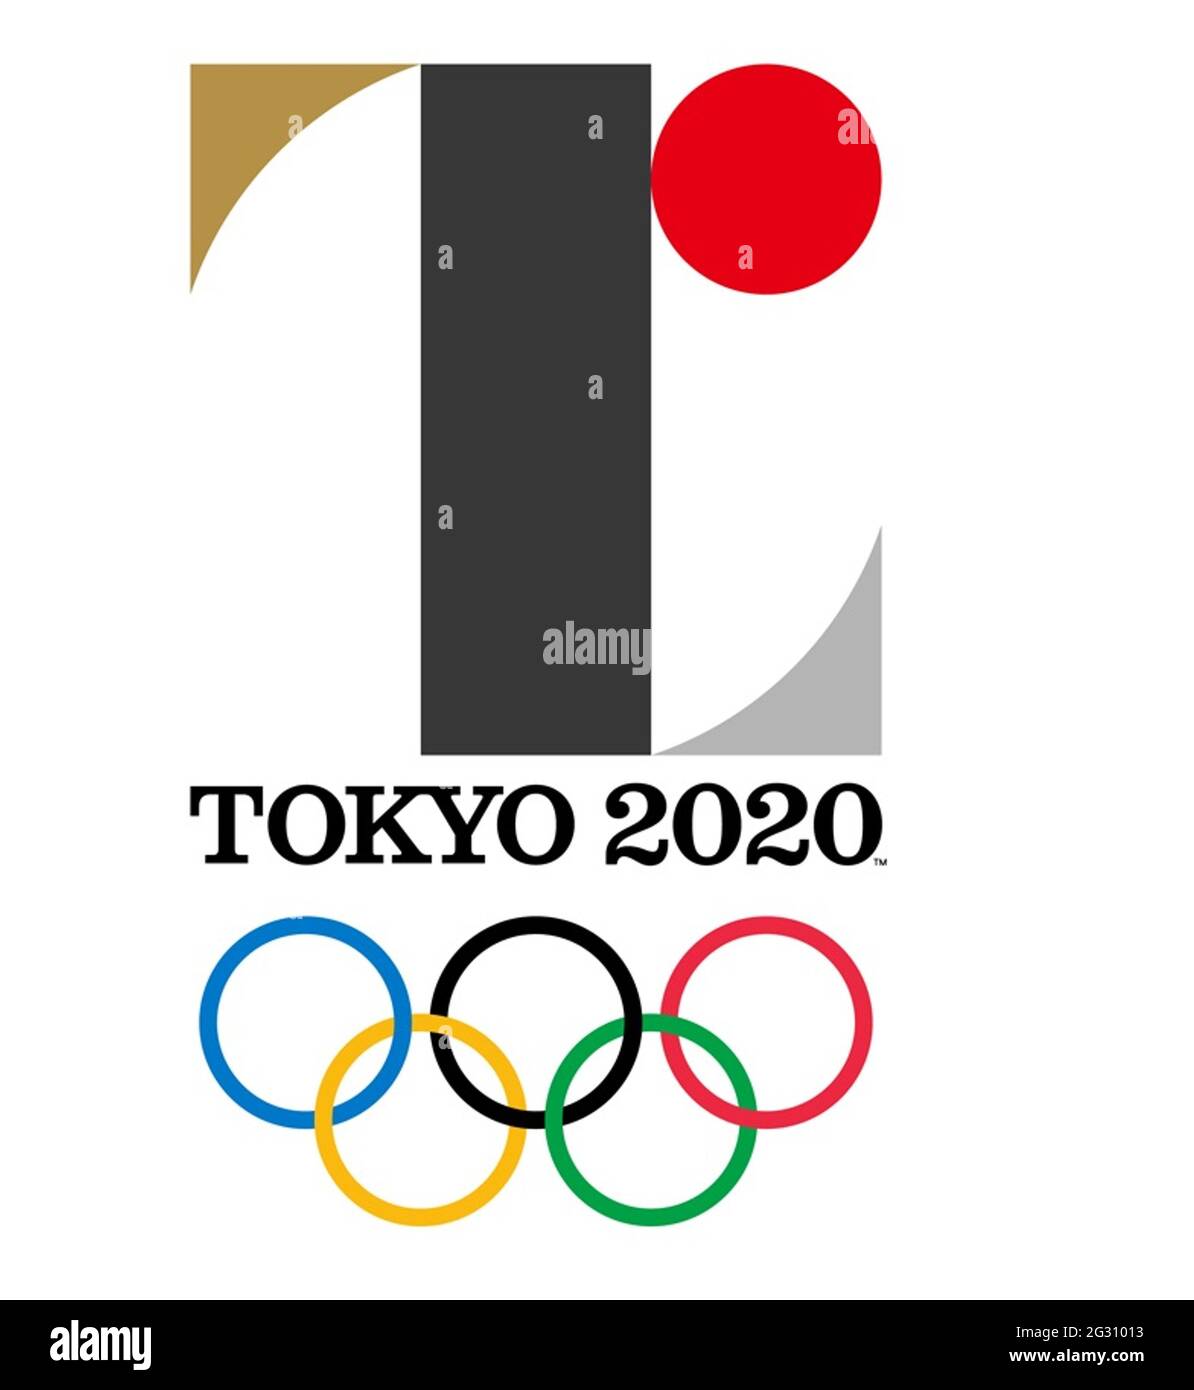 Tokyo 2020 Olympic poster Stock Photo